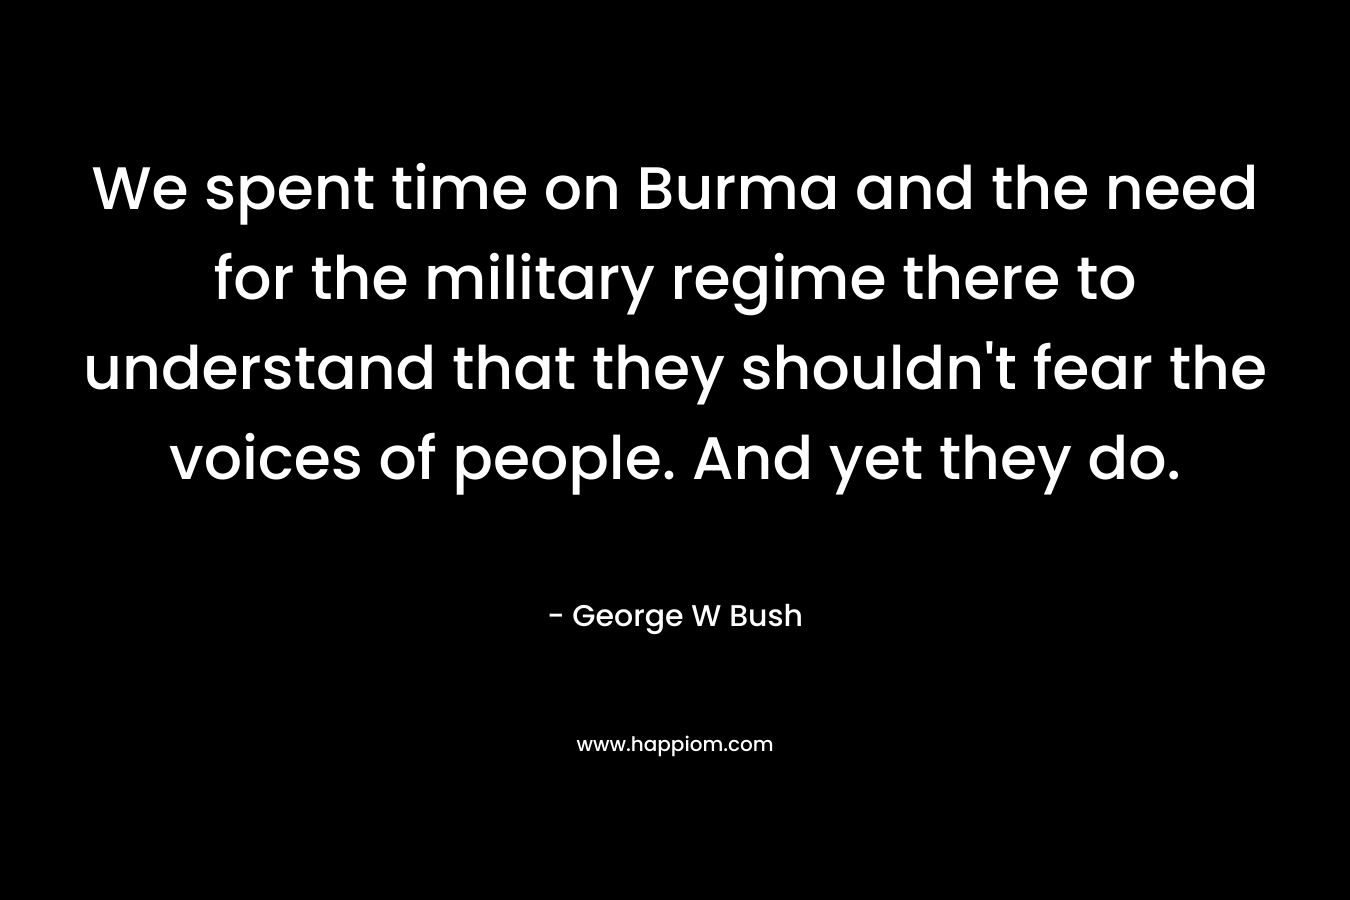 We spent time on Burma and the need for the military regime there to understand that they shouldn't fear the voices of people. And yet they do.